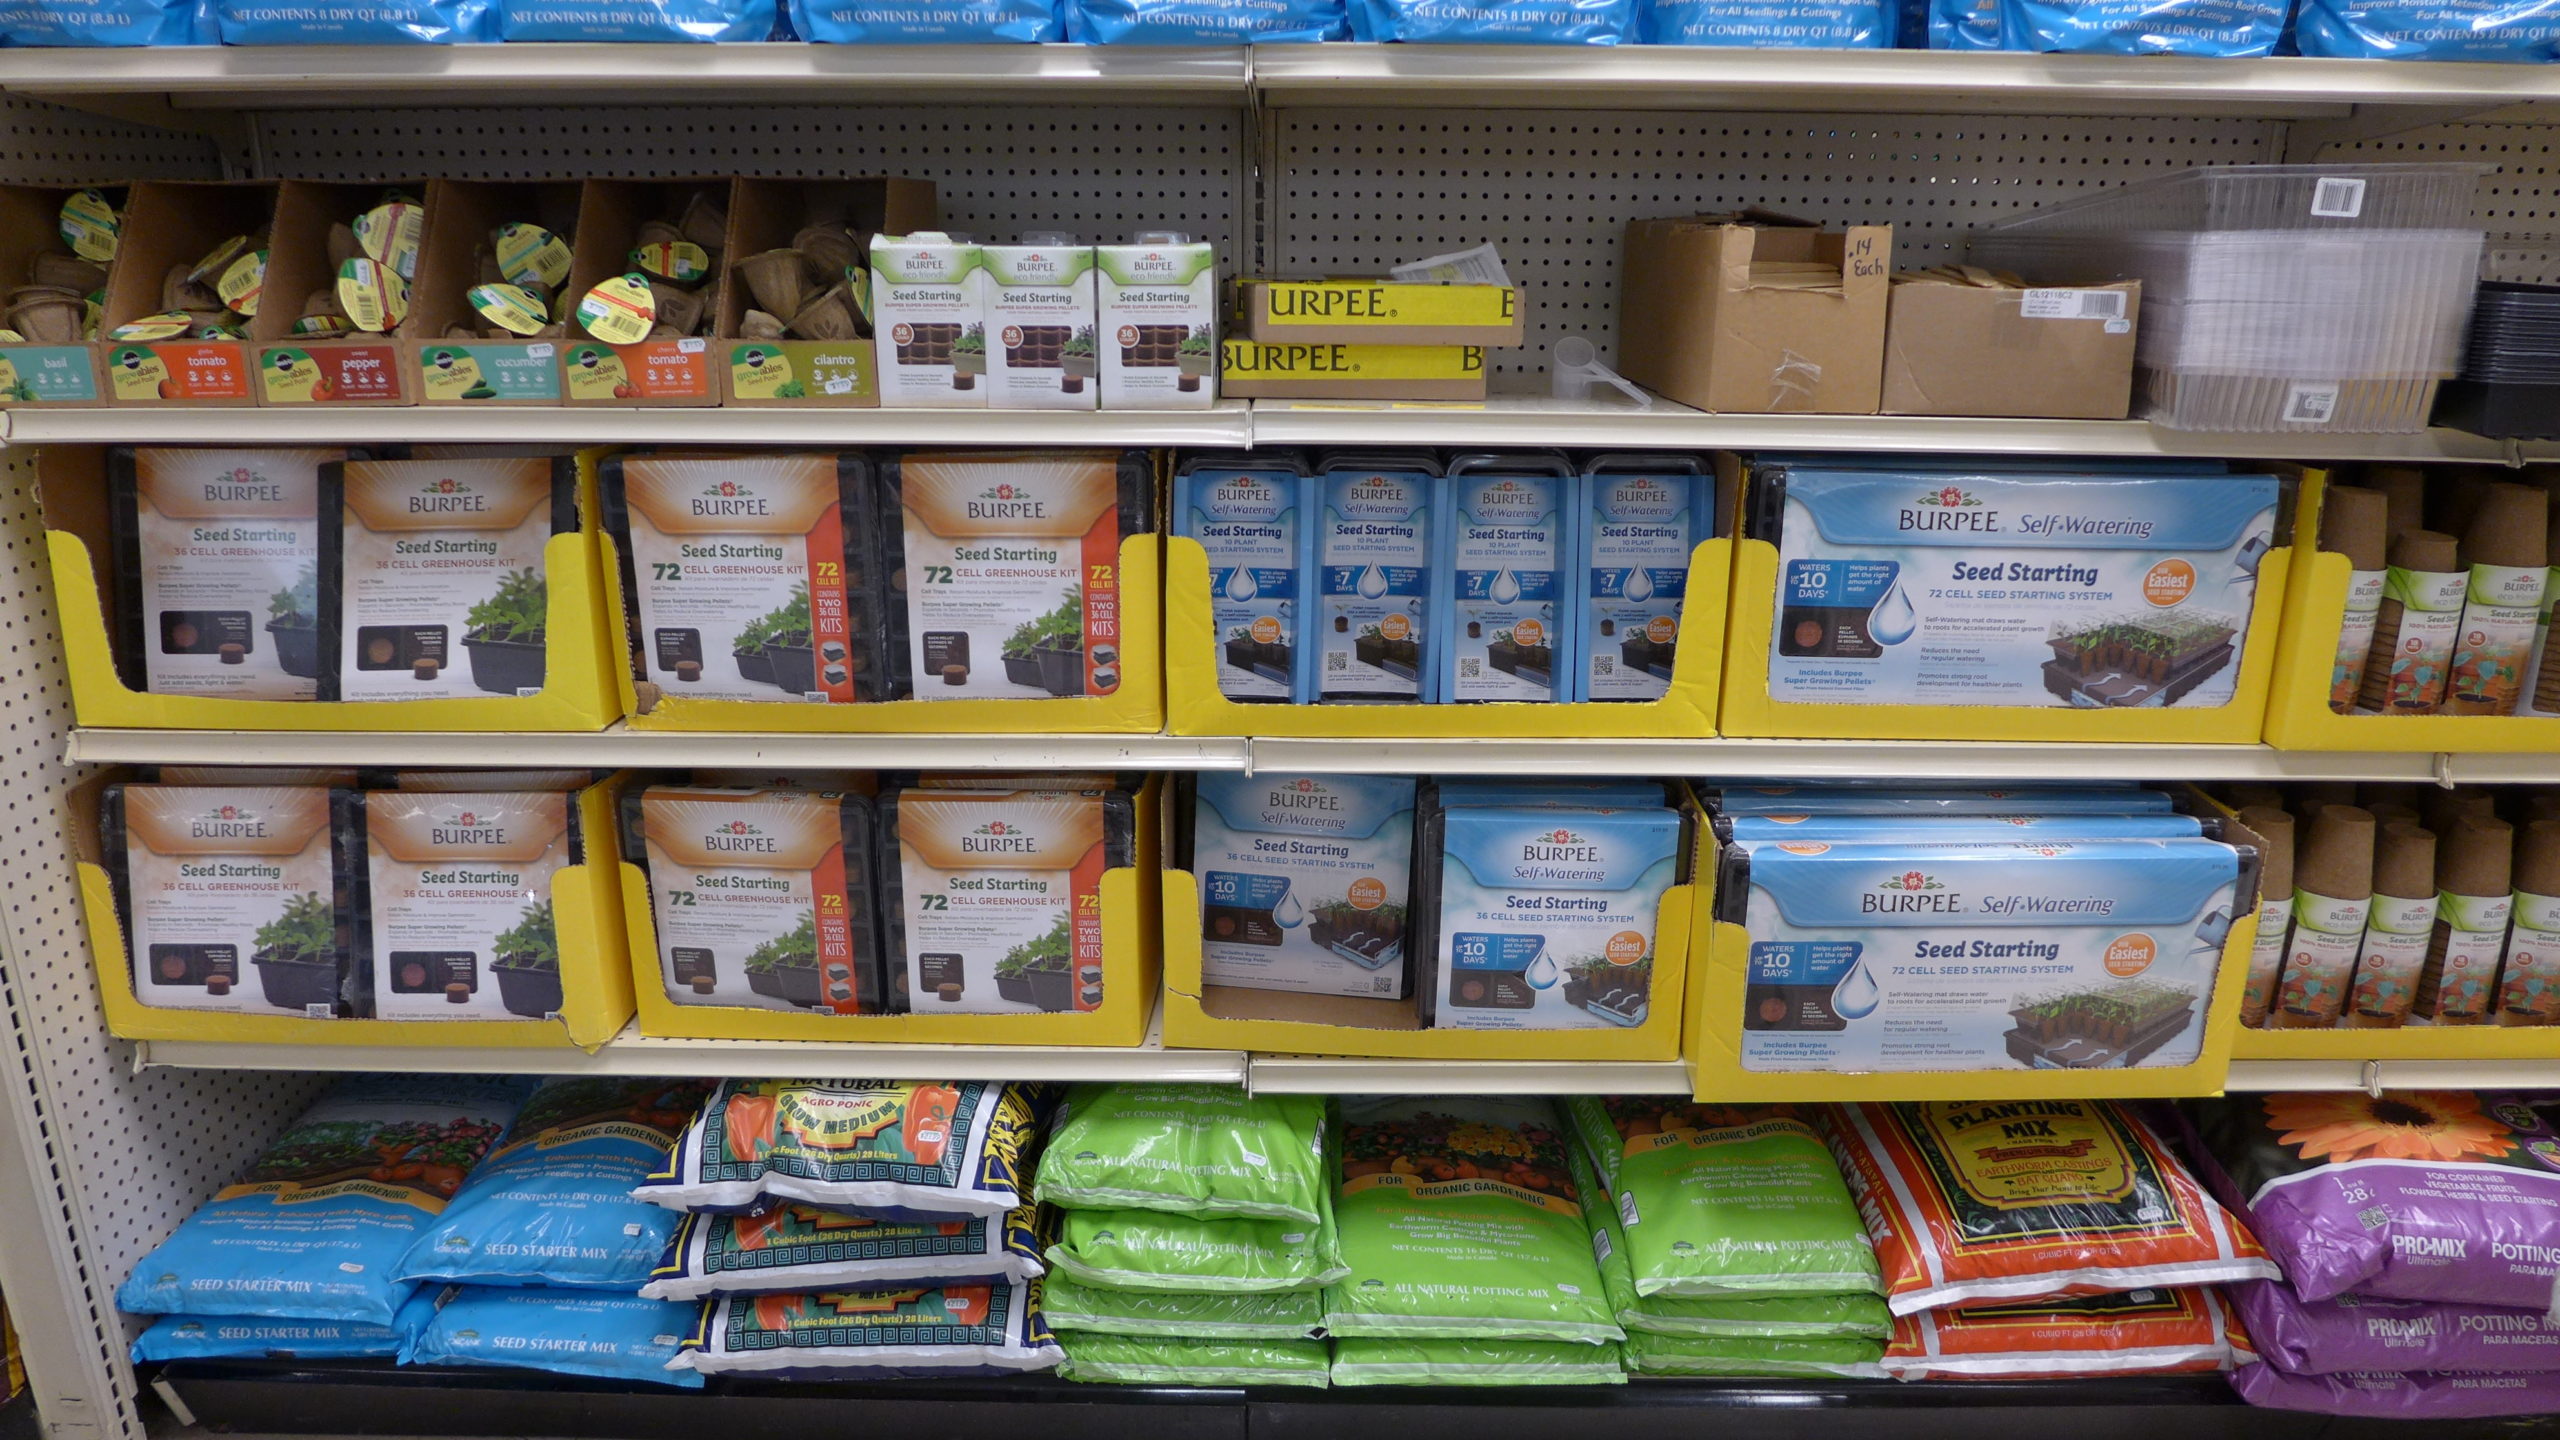 A well-stocked garden center will have a number of seed starting kits. Some are just seed flats with plastic domes, while others come complete with peat pellets or pots.